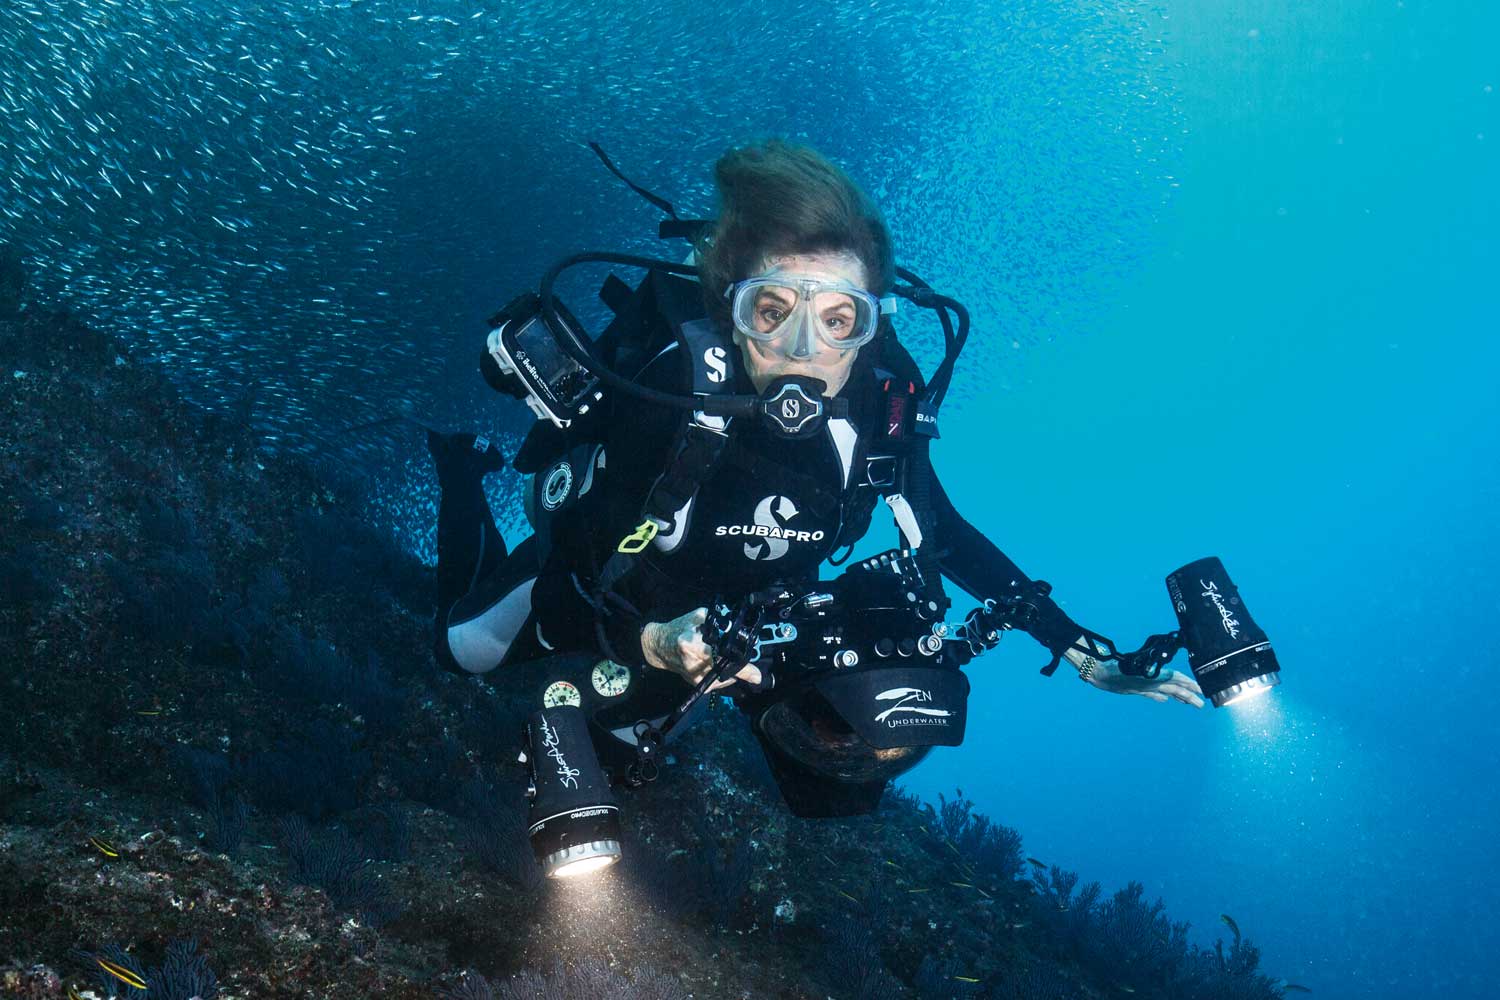 Dr. Sylvia Earle at work, with a gold Datejust on the wrist